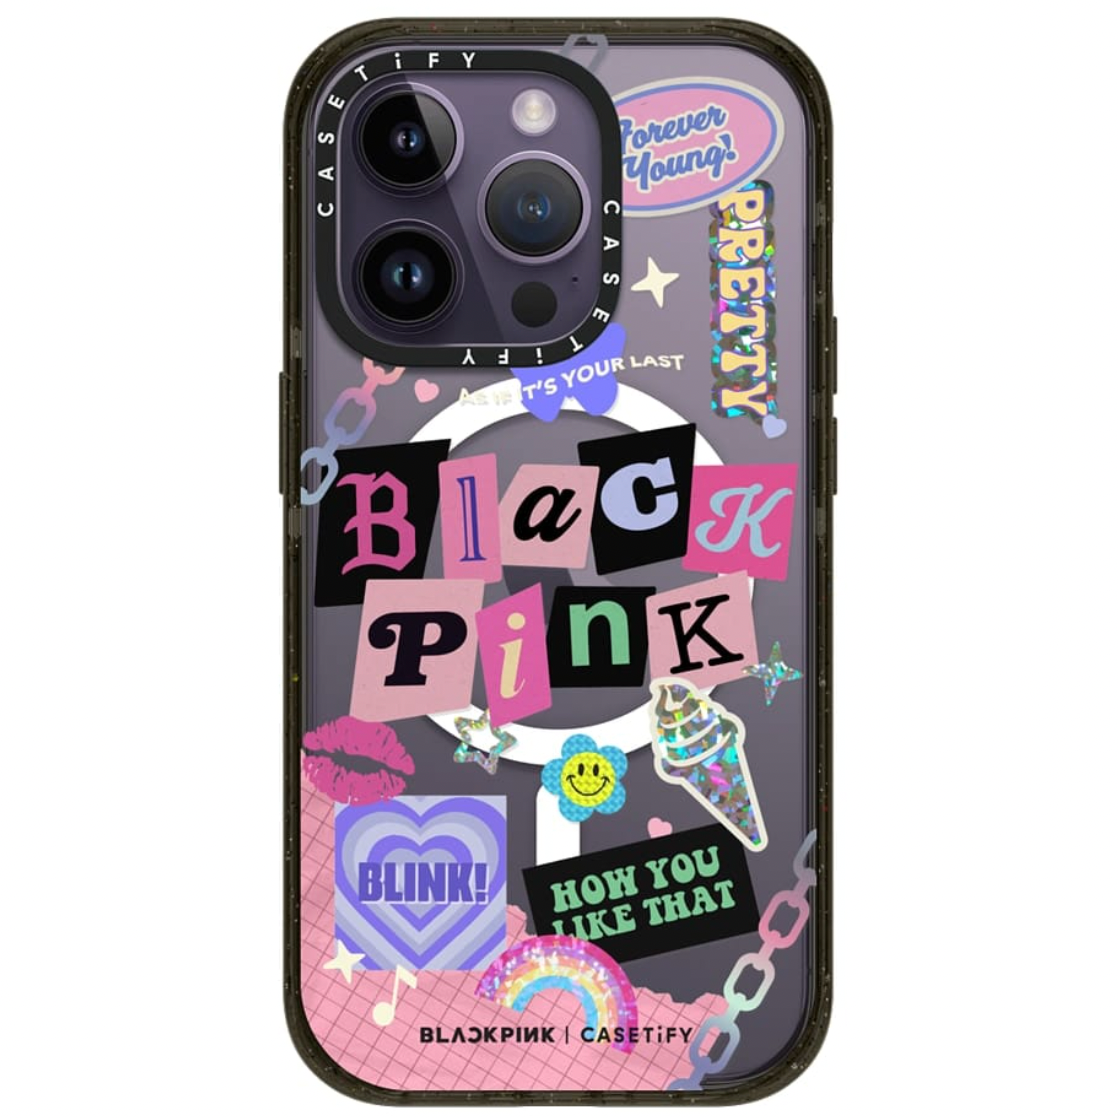 BLACKPINK Drops Second Collaboration with Casetify: Shop All The 